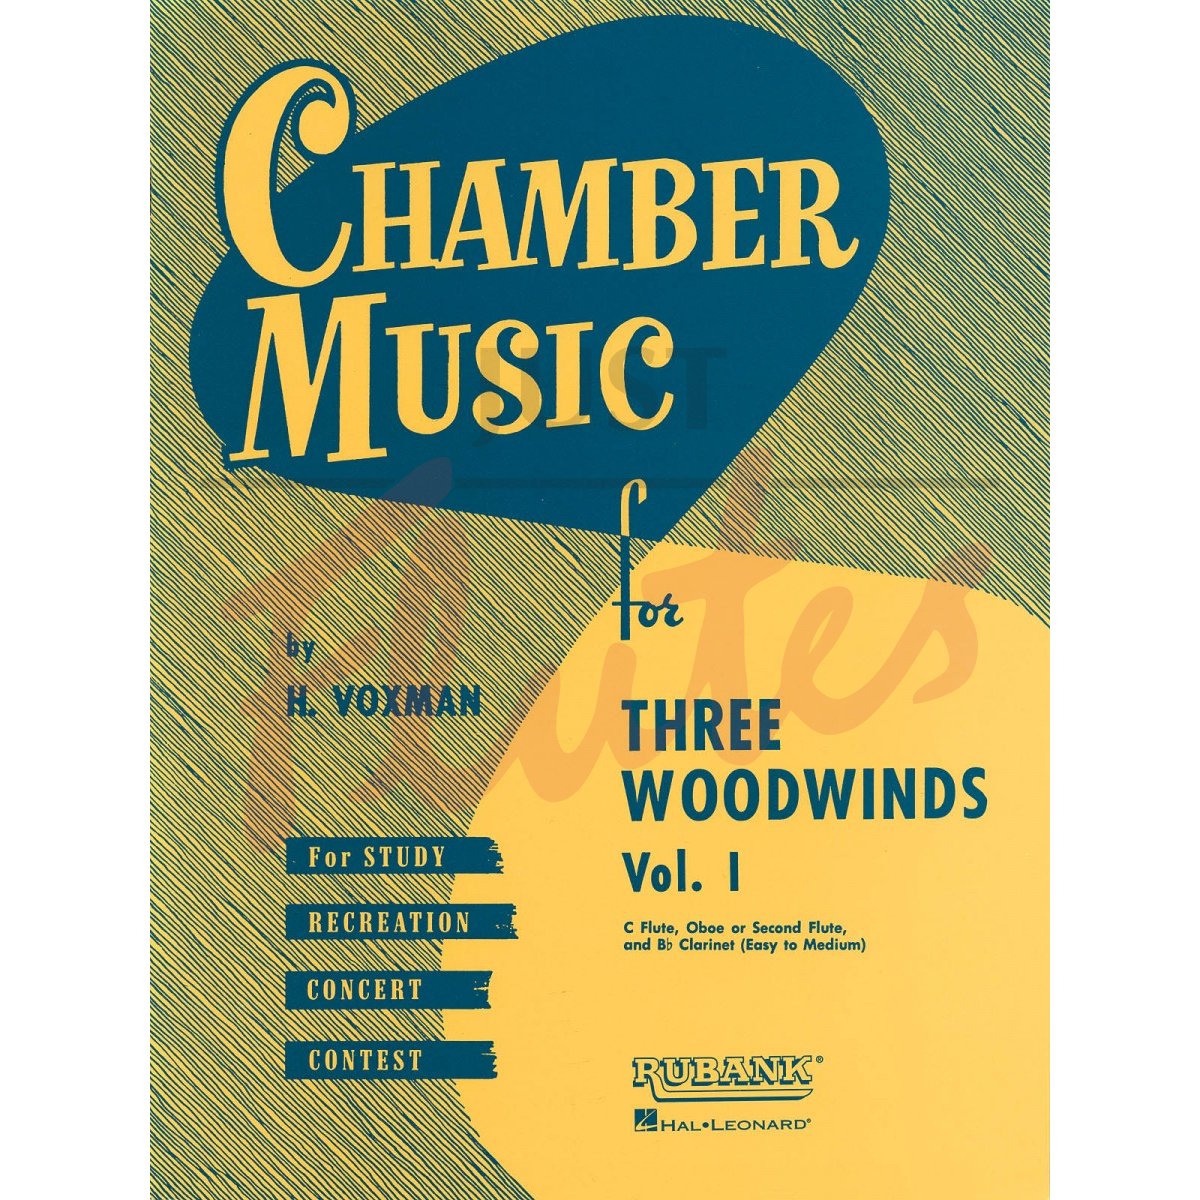 Chamber Music for Three Woodwinds, Vol 1